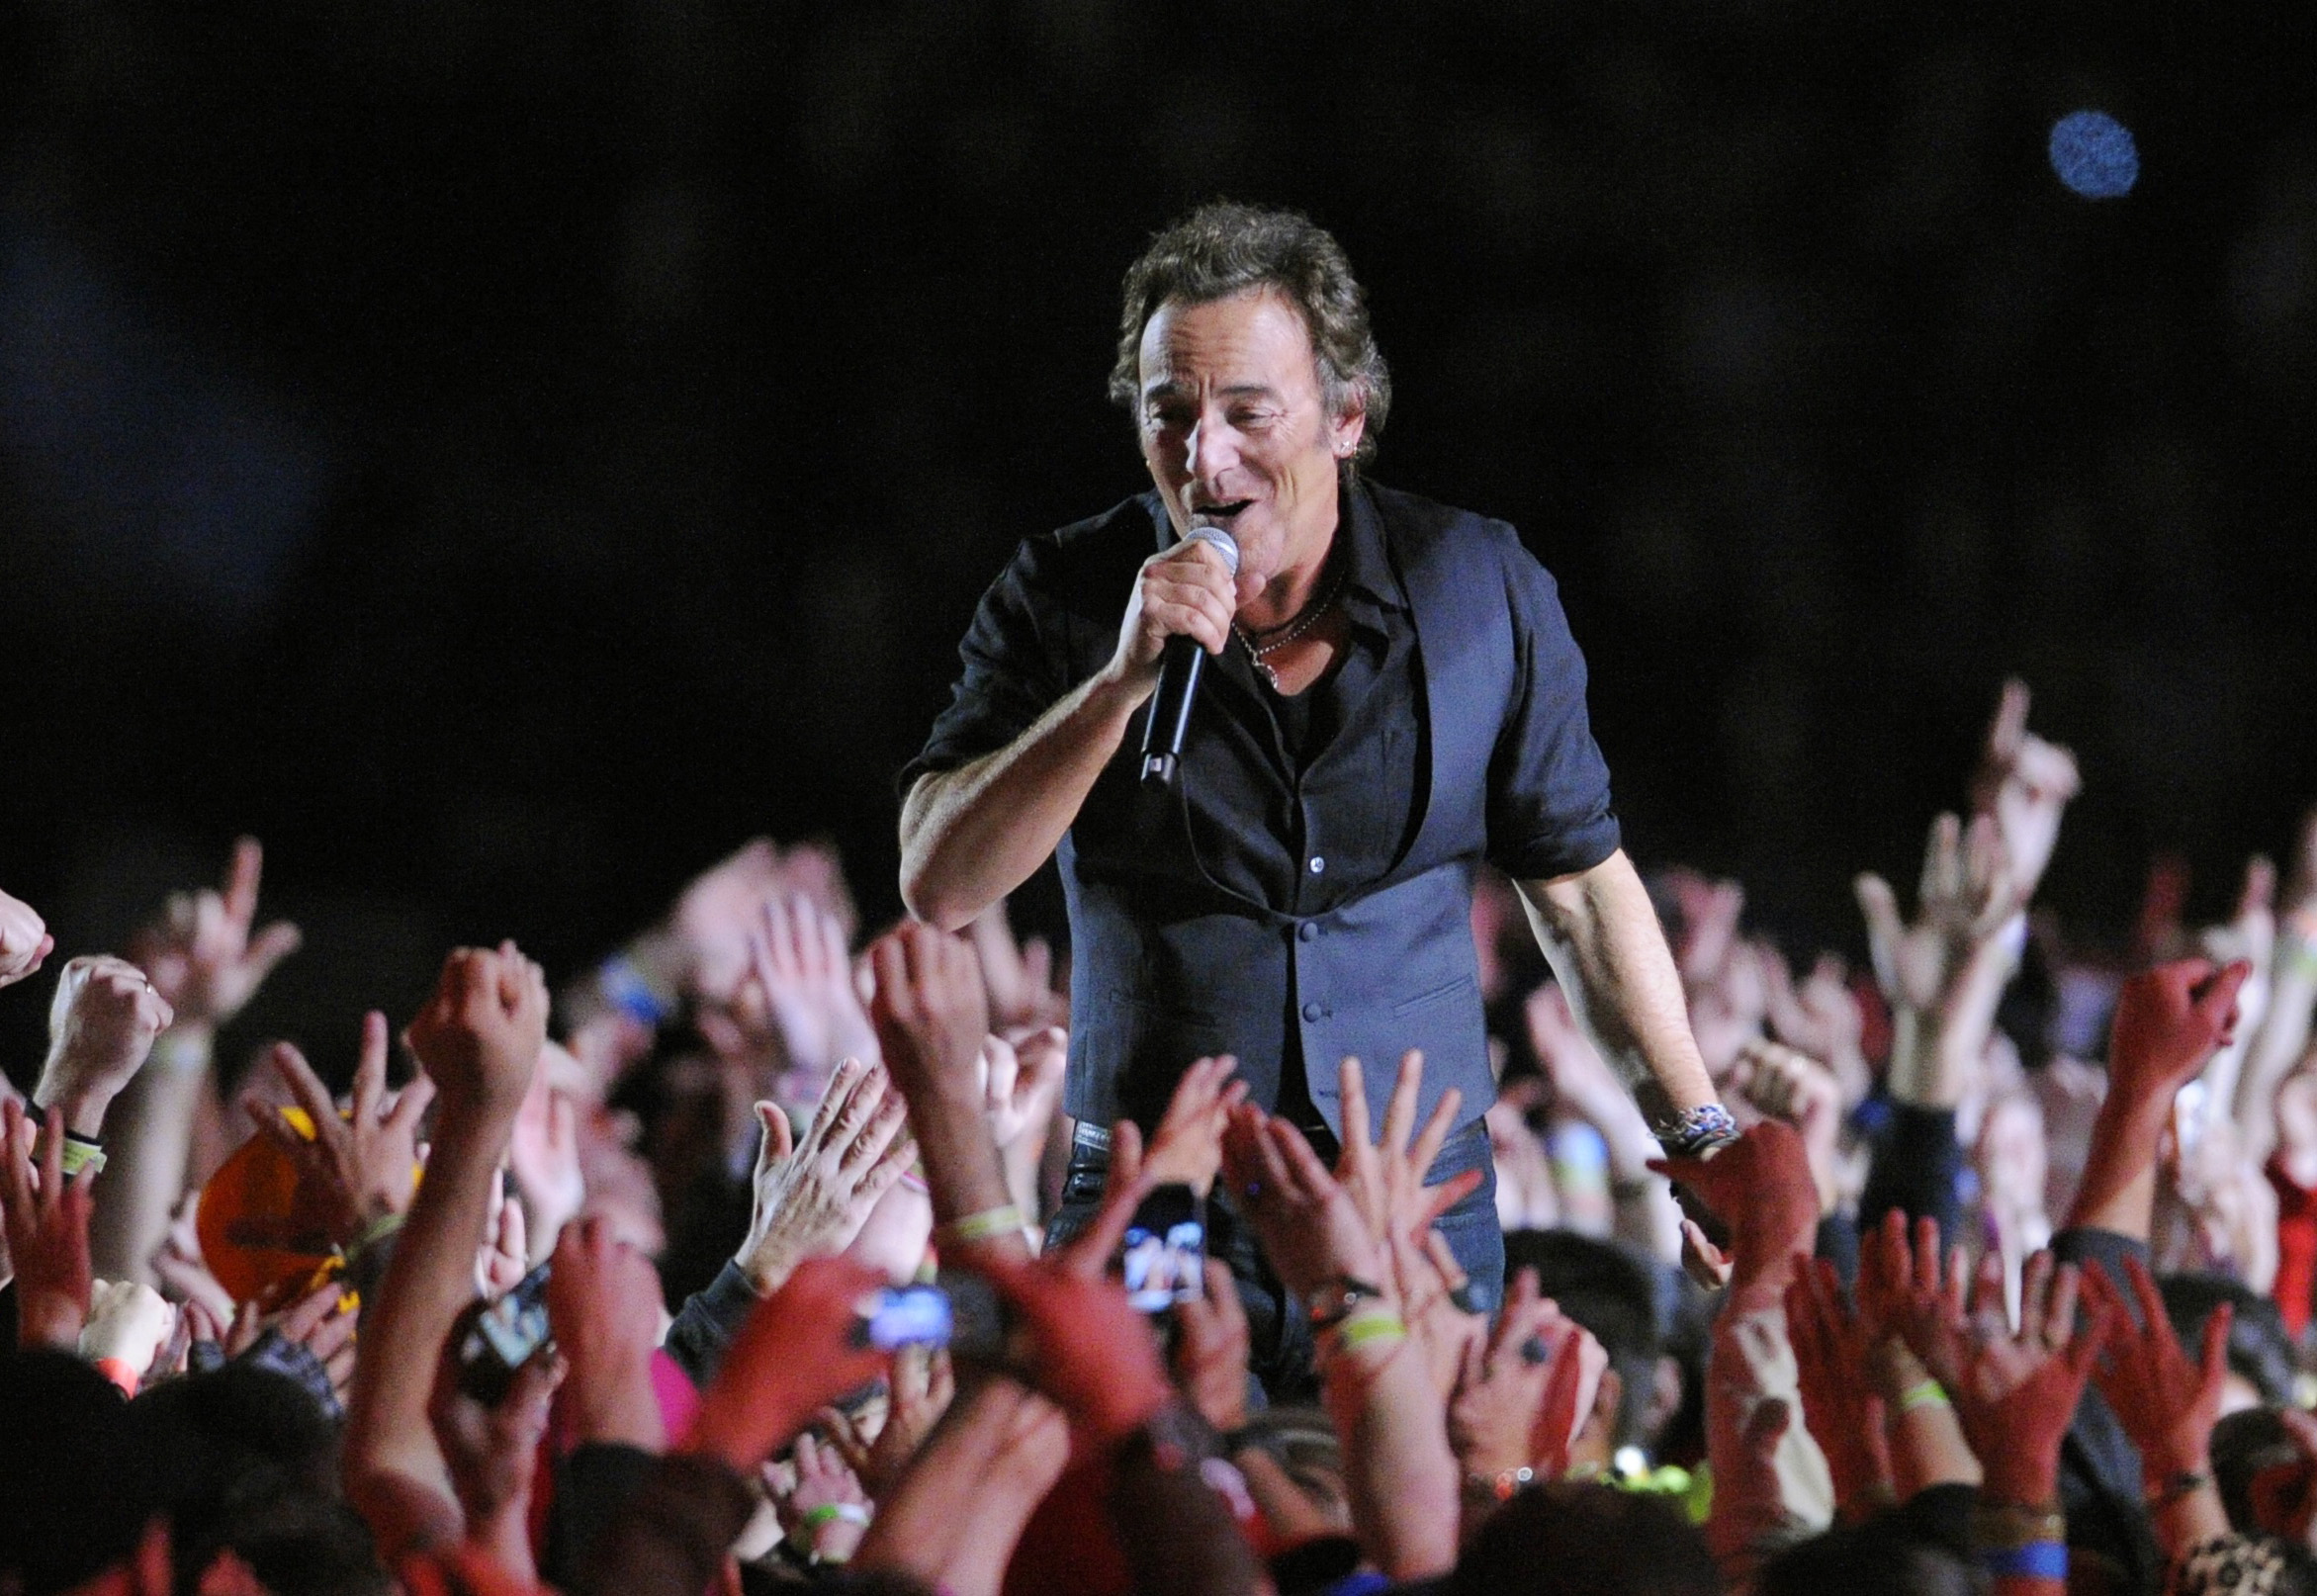 In this Feb. 1, 2009 file photo, Bruce Springsteen performs during halftime of the NFL Super Bowl XLIII football game between the Arizona Cardinals and the Pittsburgh Steelers in Tampa, Florida. AP